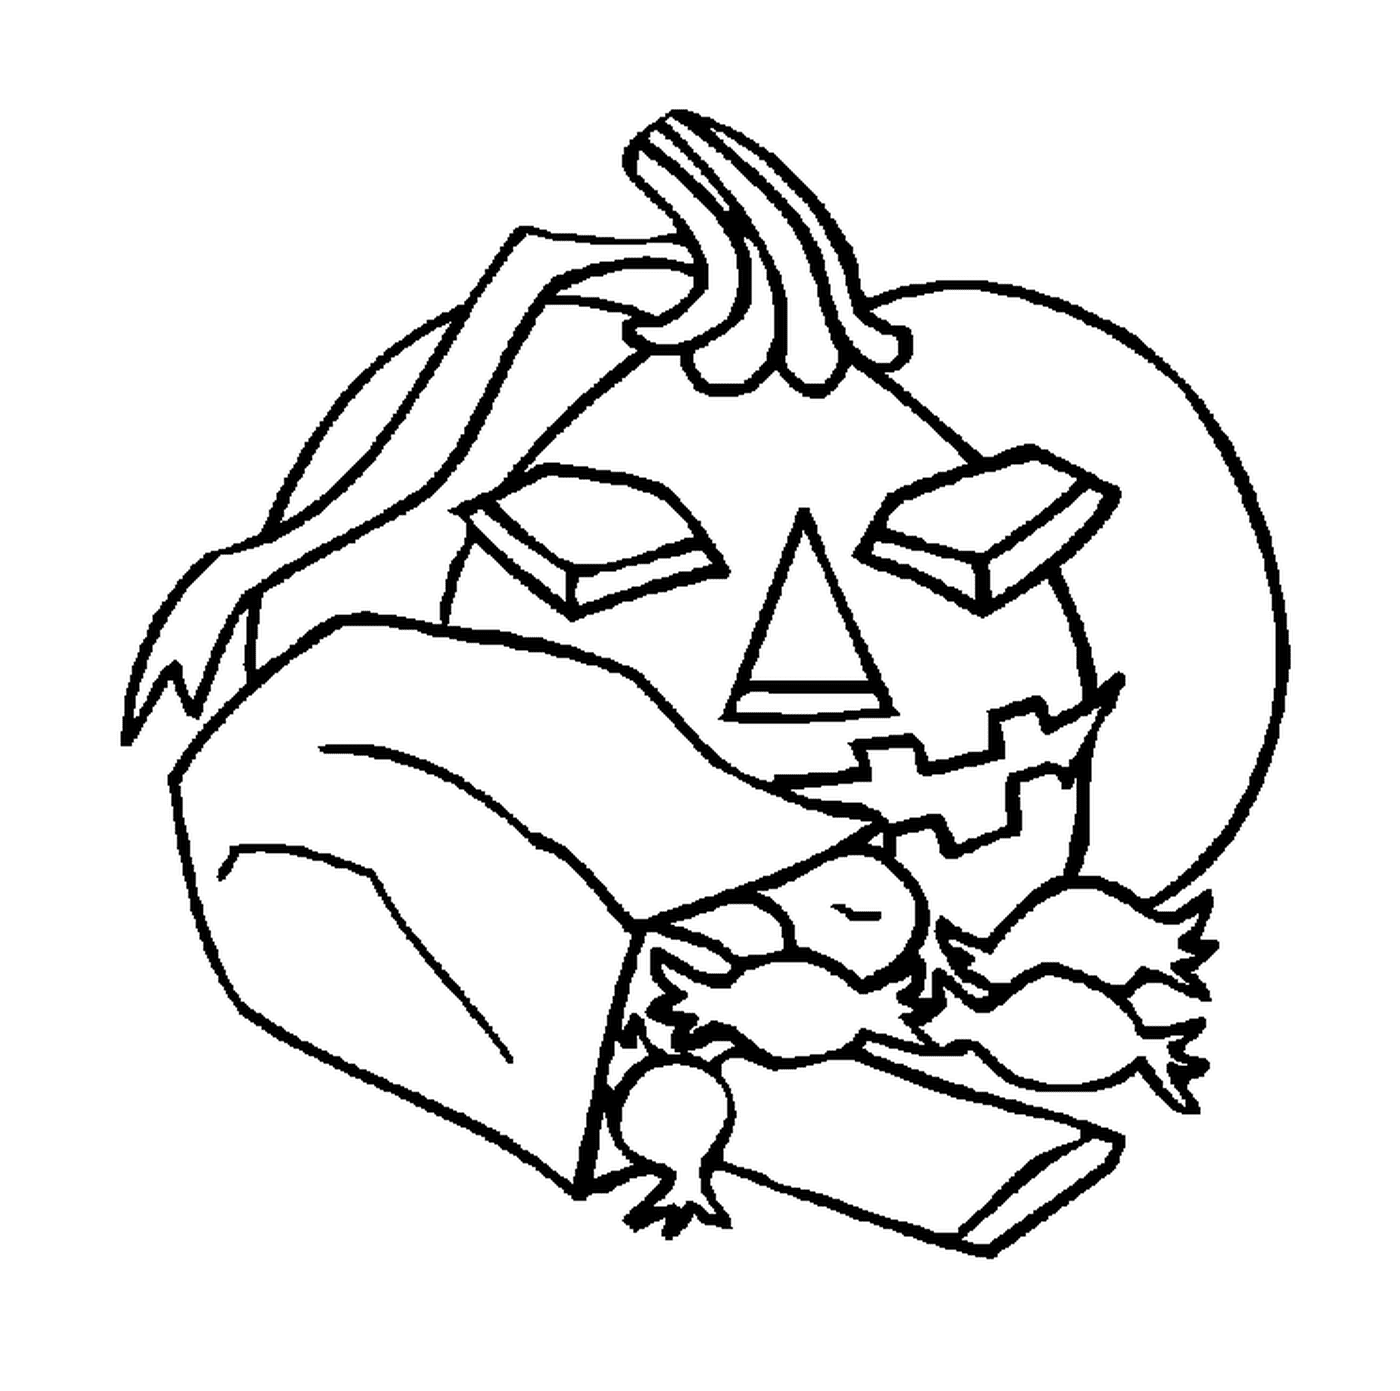  Pumpkin with a bag of confectionery 